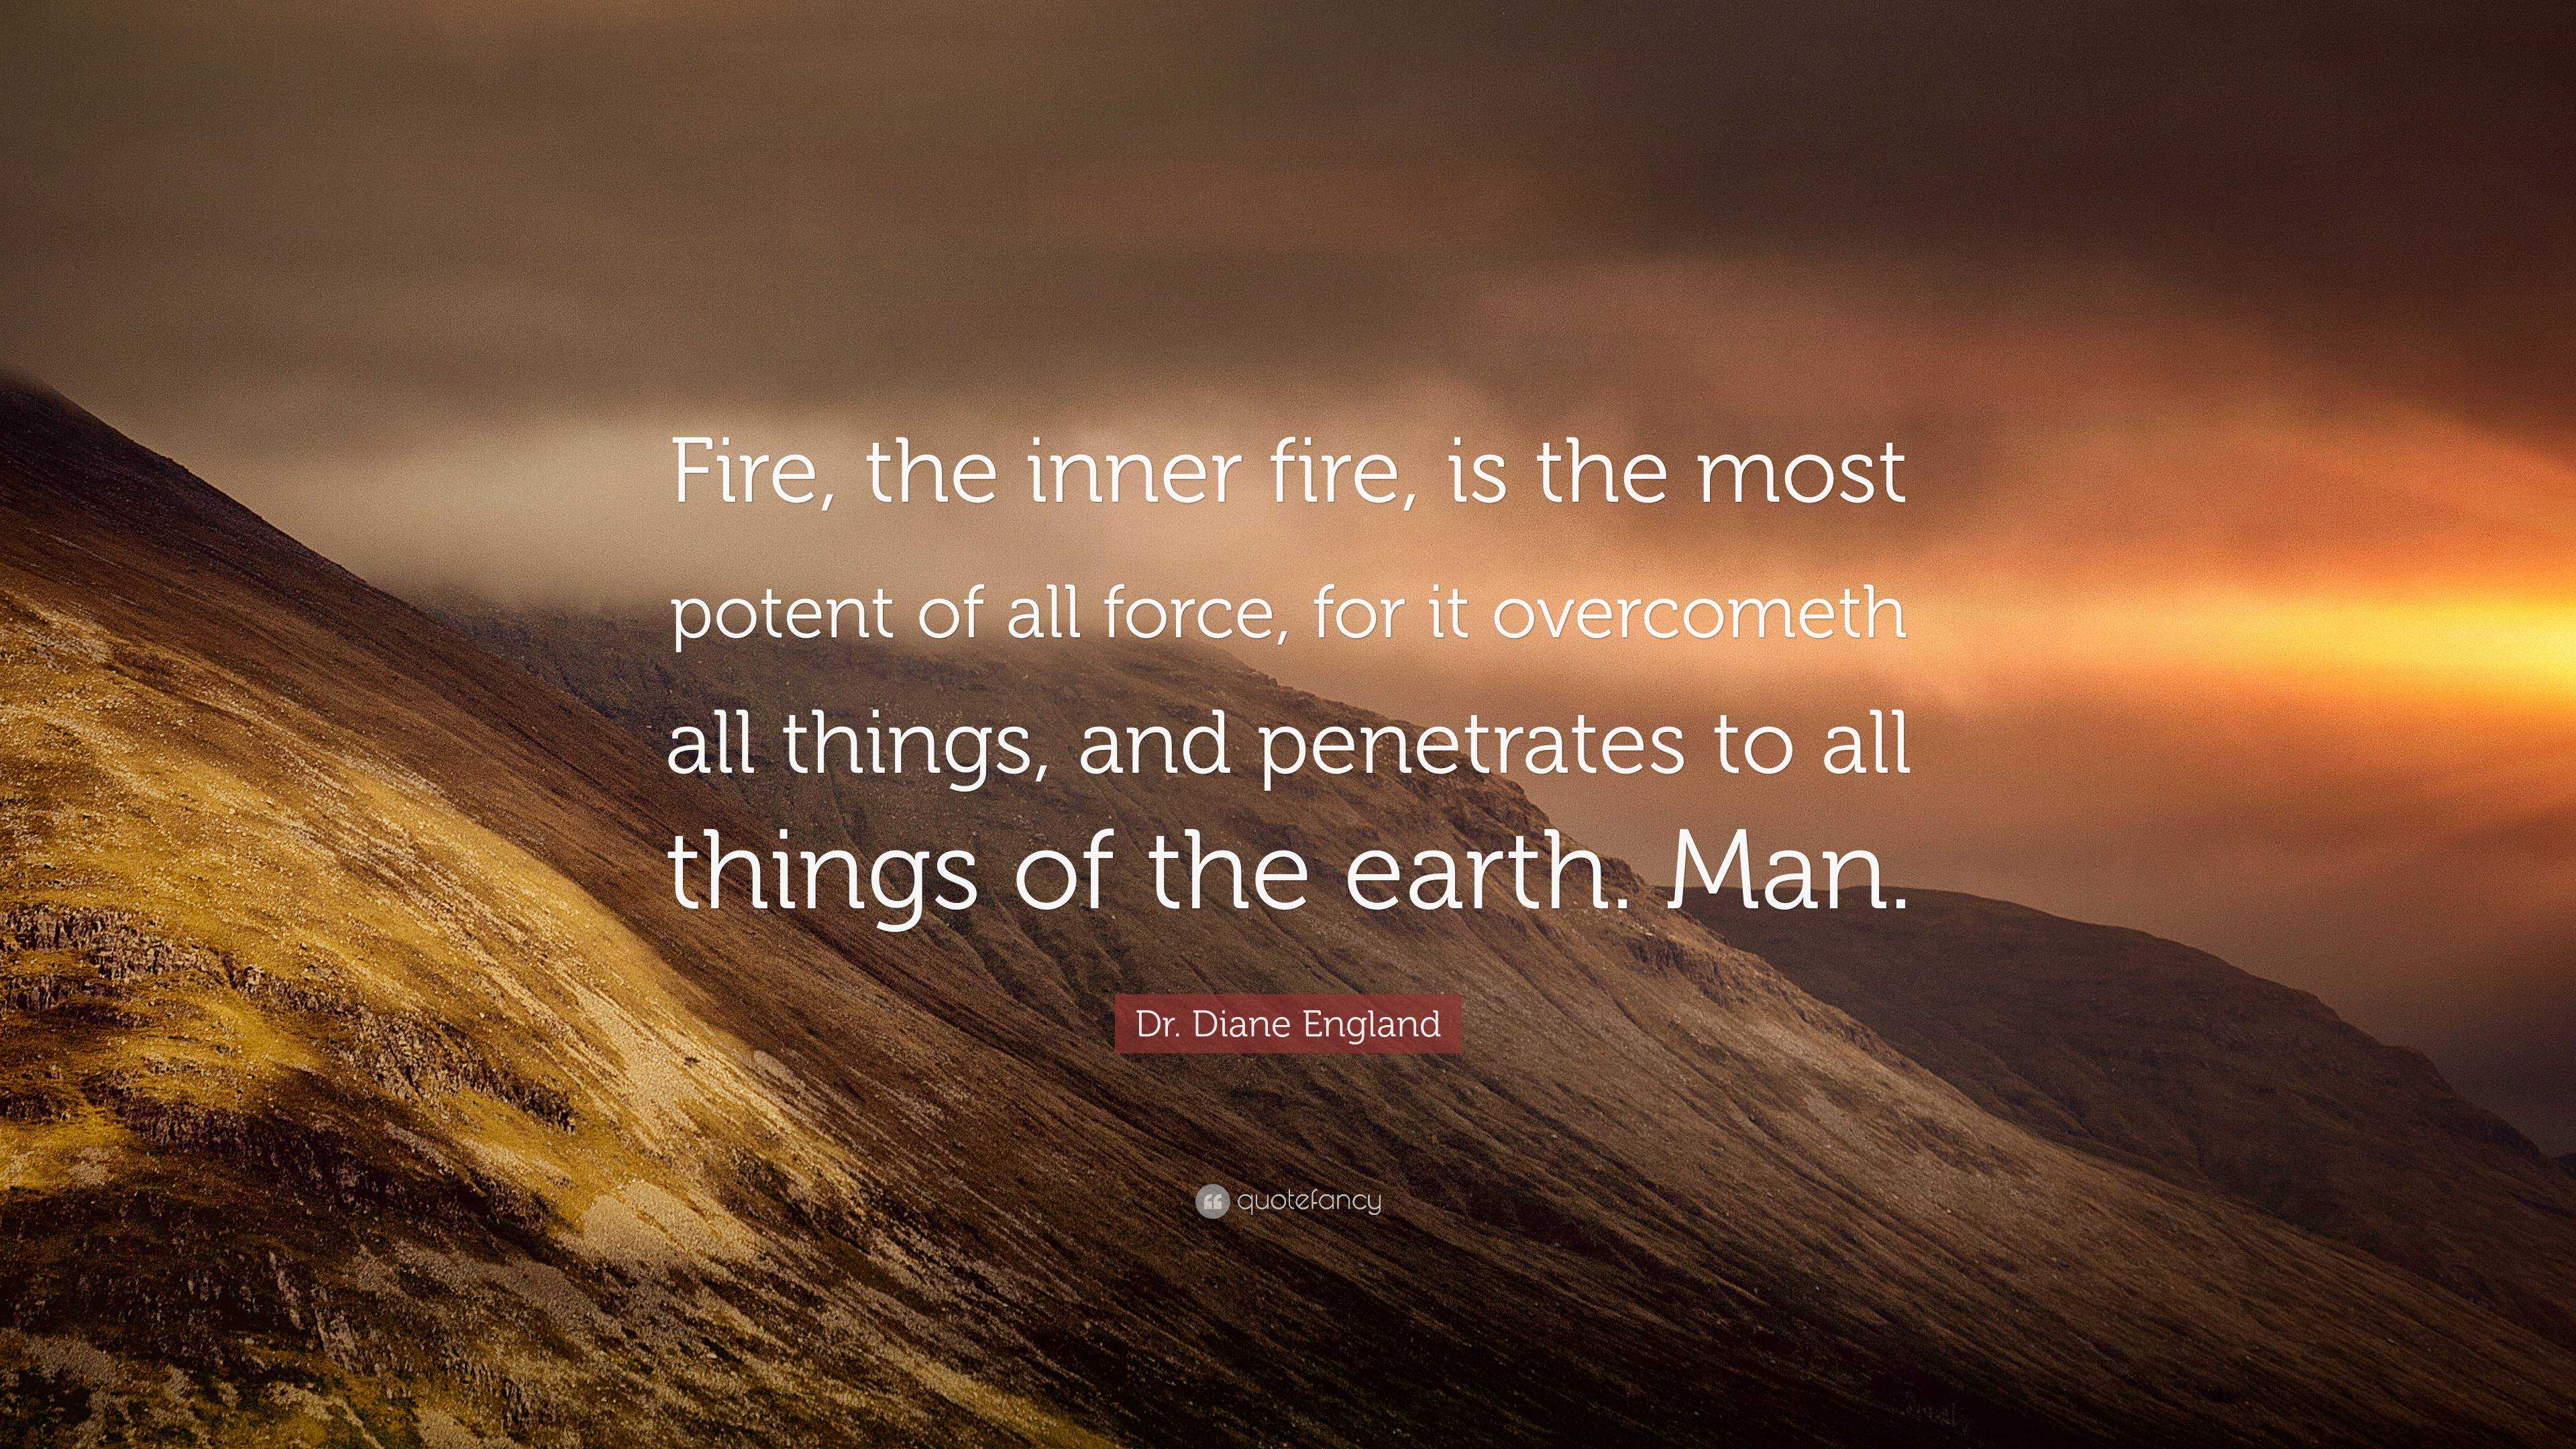 Dr. Diane England Quote: “Fire, the inner fire, is the most potent of all  force, for it overcometh all things, and penetrates to all things of the”